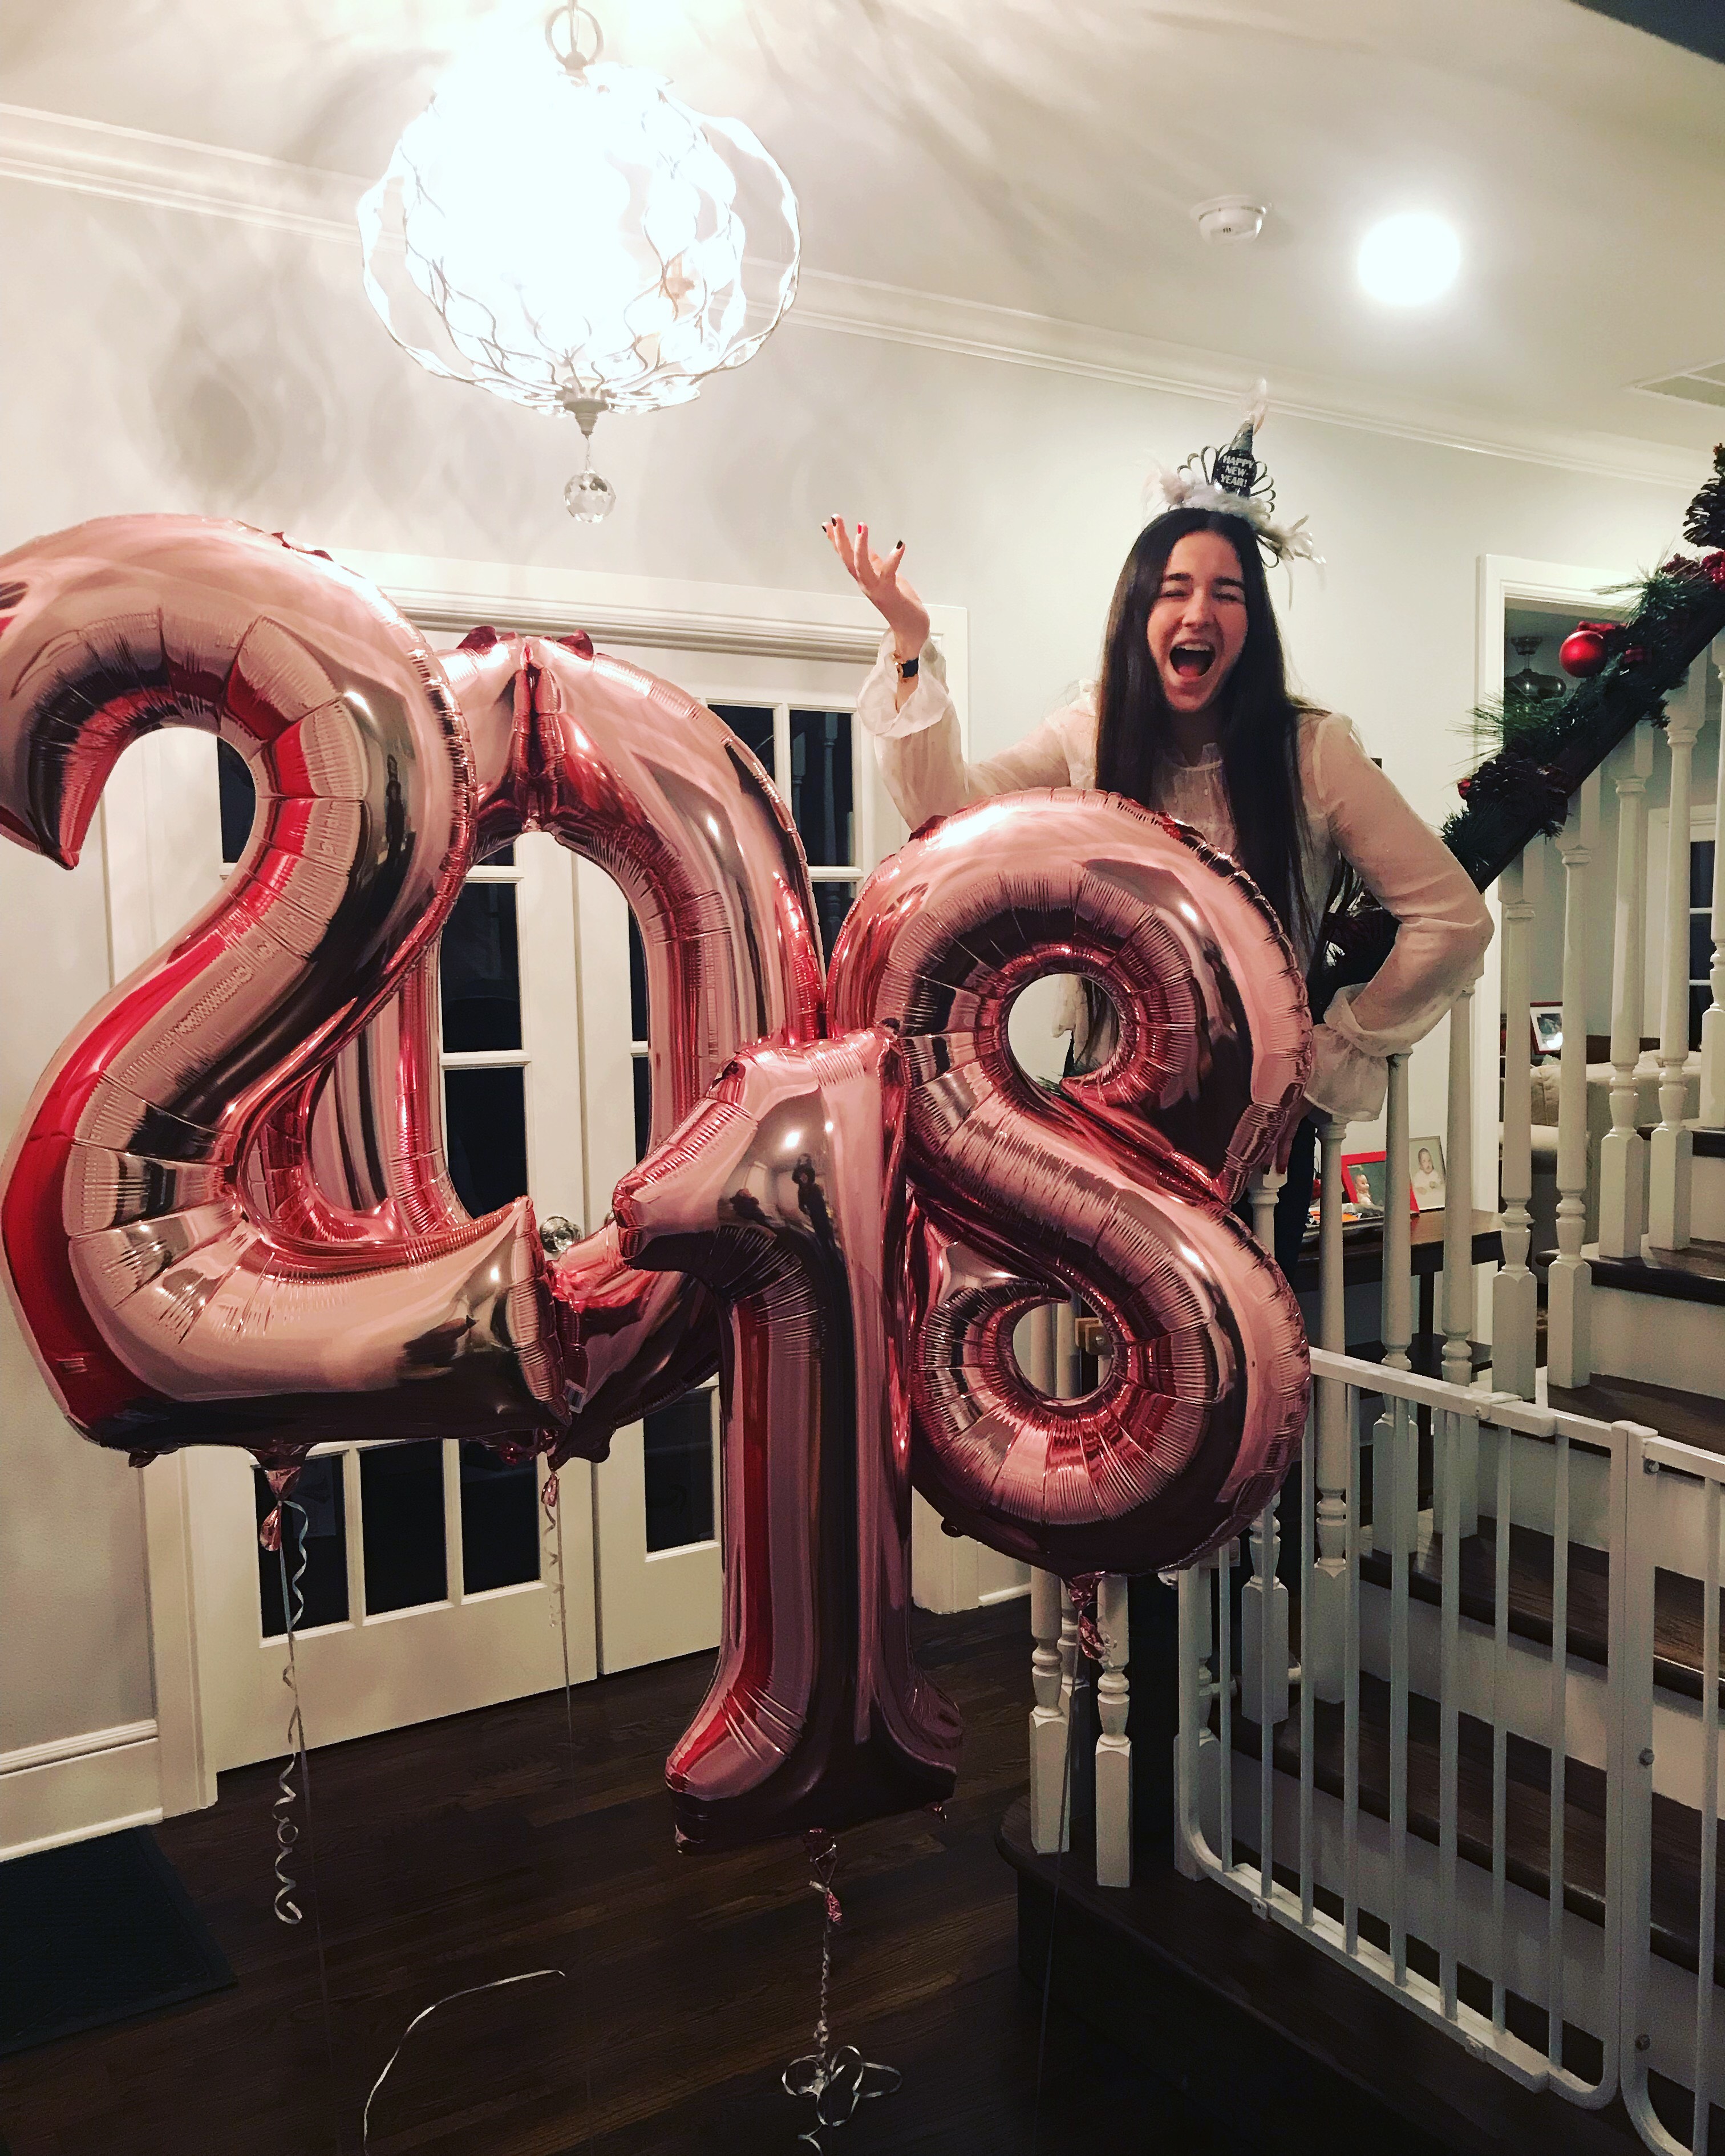 Katerine with some pink "2018" balloons.